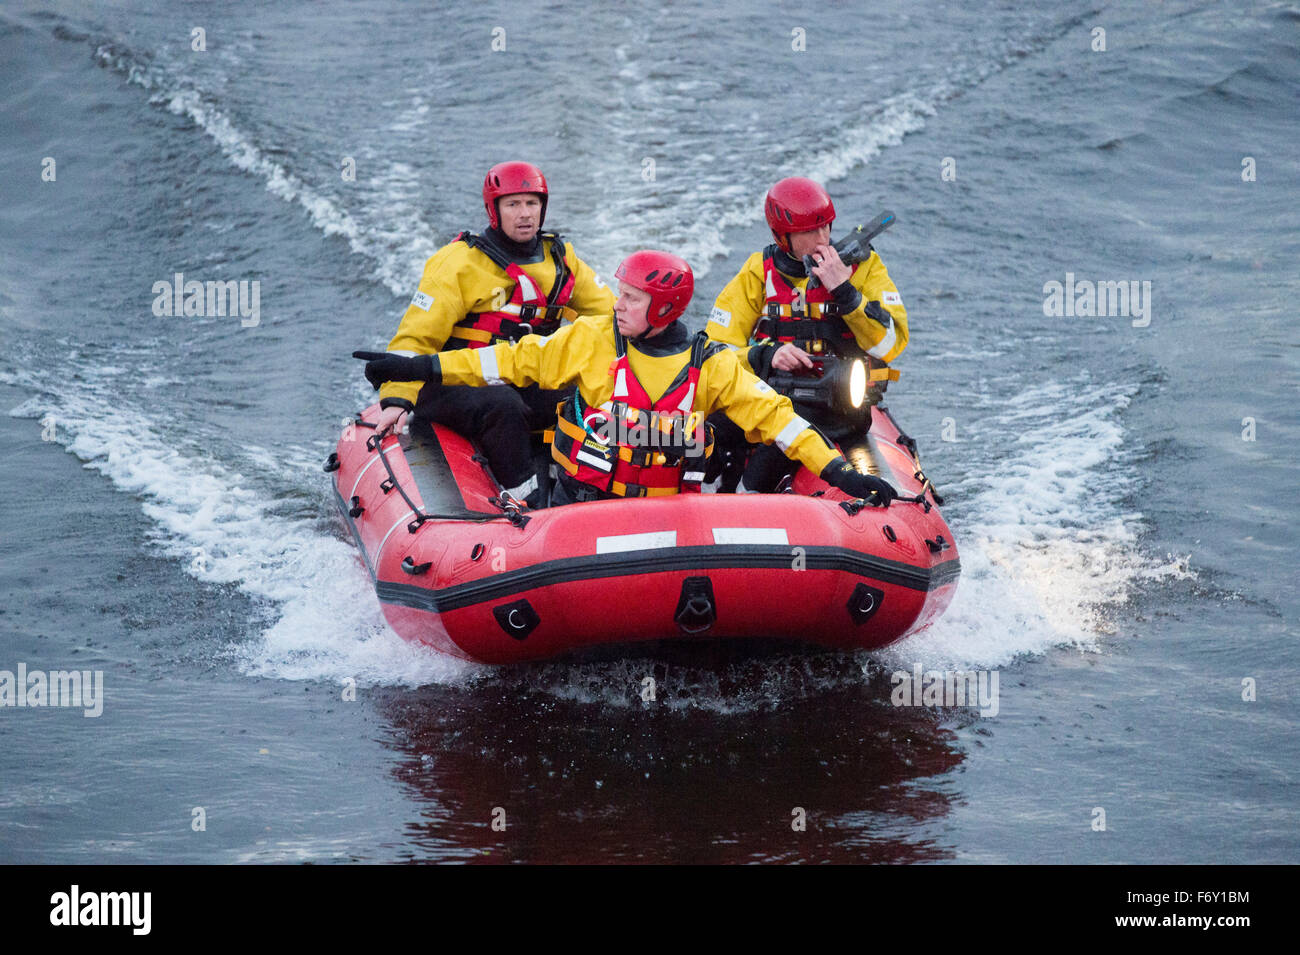 A South Wales Fire and Rescue team use a speed boat to search for a person seen entering the River Taff in Cardiff, South Wales. Stock Photo